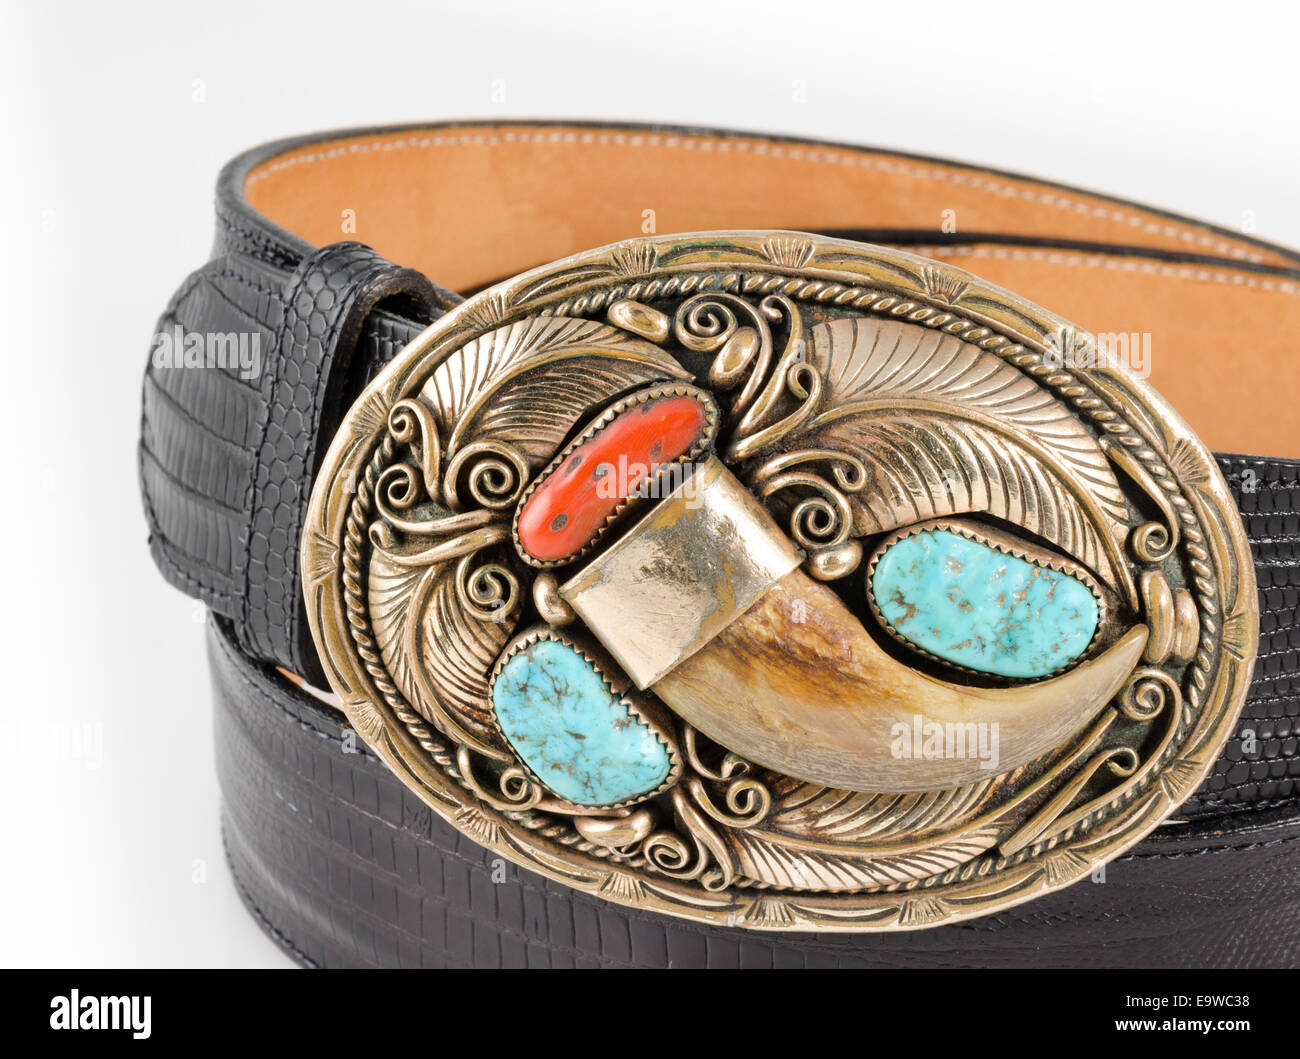 Gold, Bear Claw and Turquoise Belt Buckle and Snake Skin Belt. Stock Photo